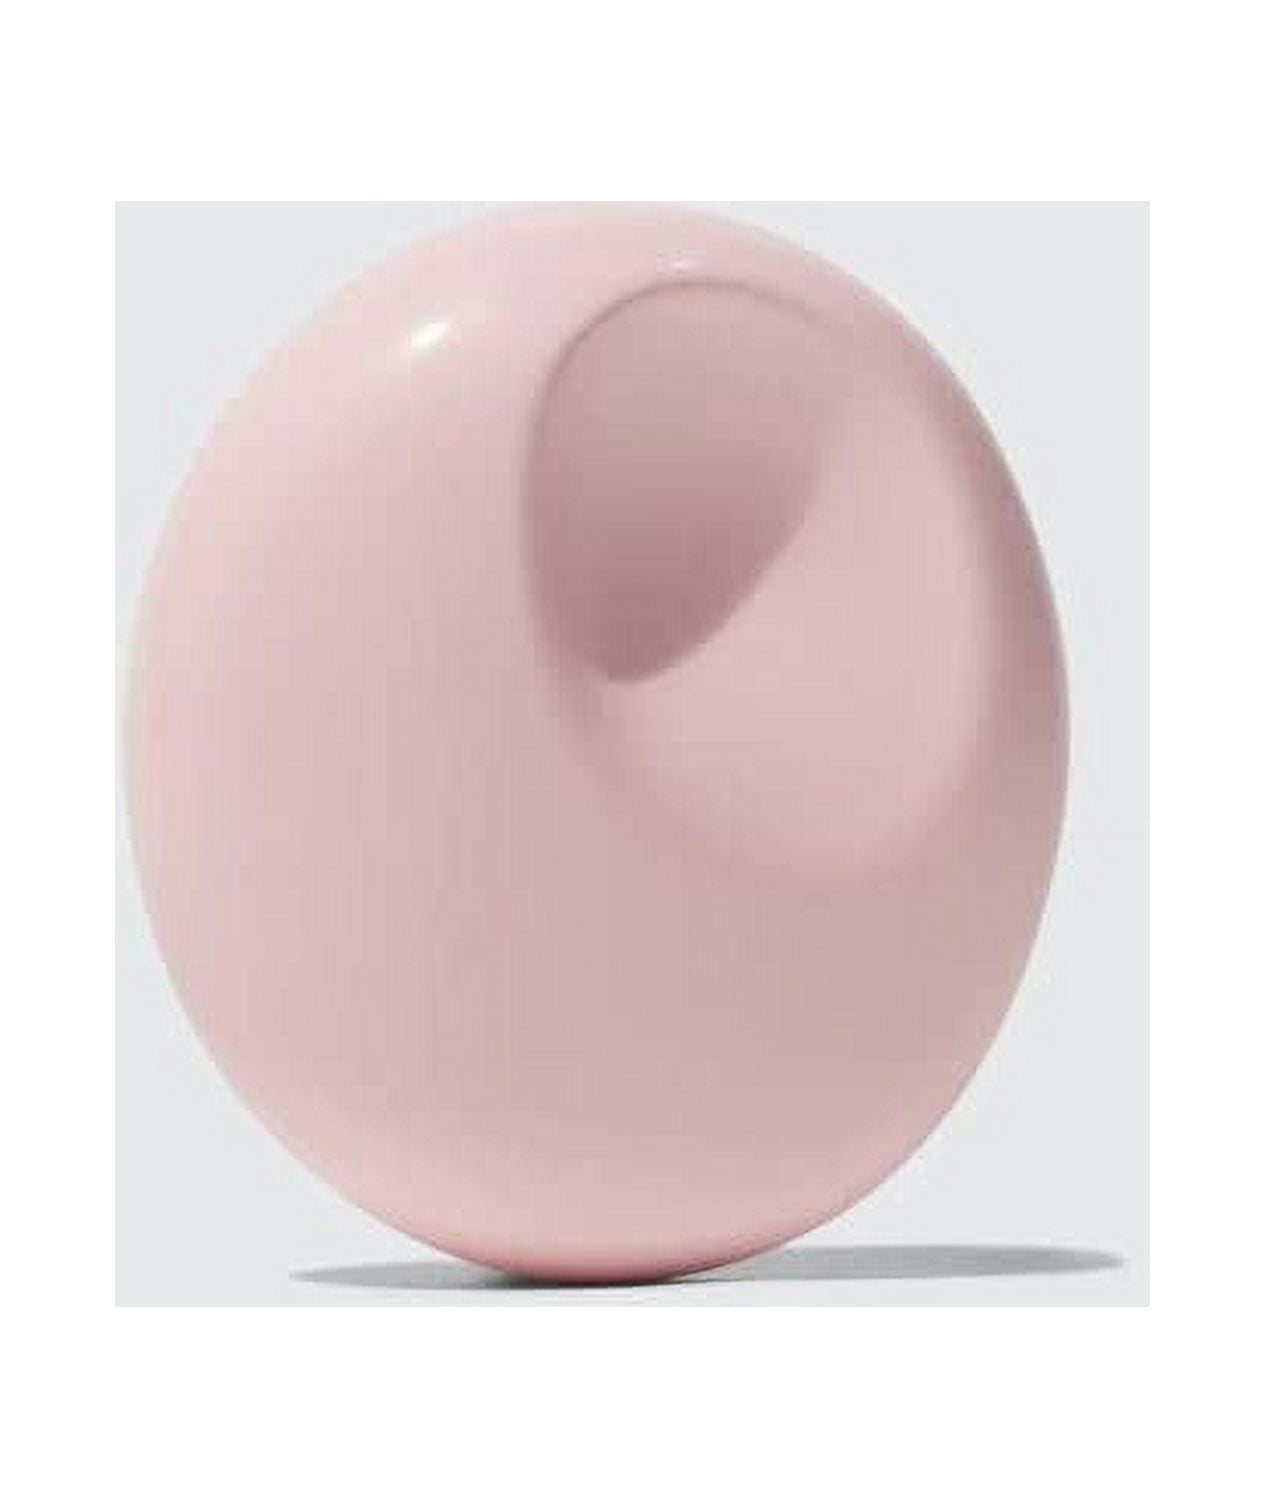 You by Glossier (Solid Perfume) » Reviews & Perfume Facts